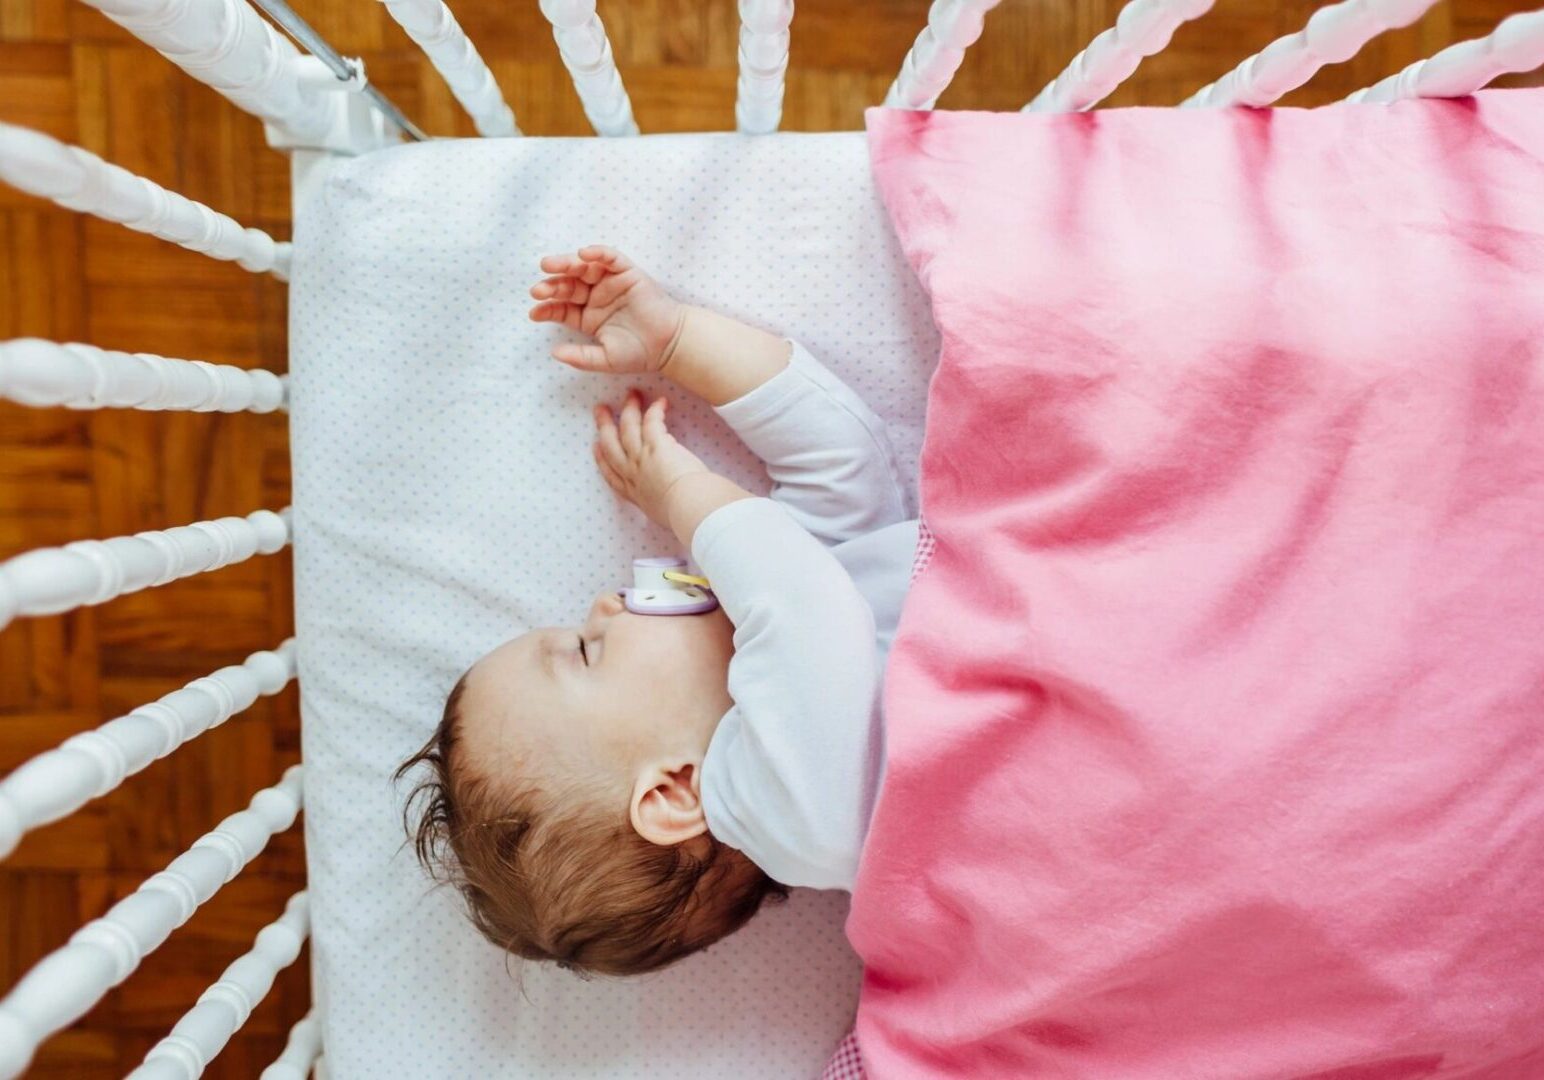 A baby sleeping in a crib and pink blanket